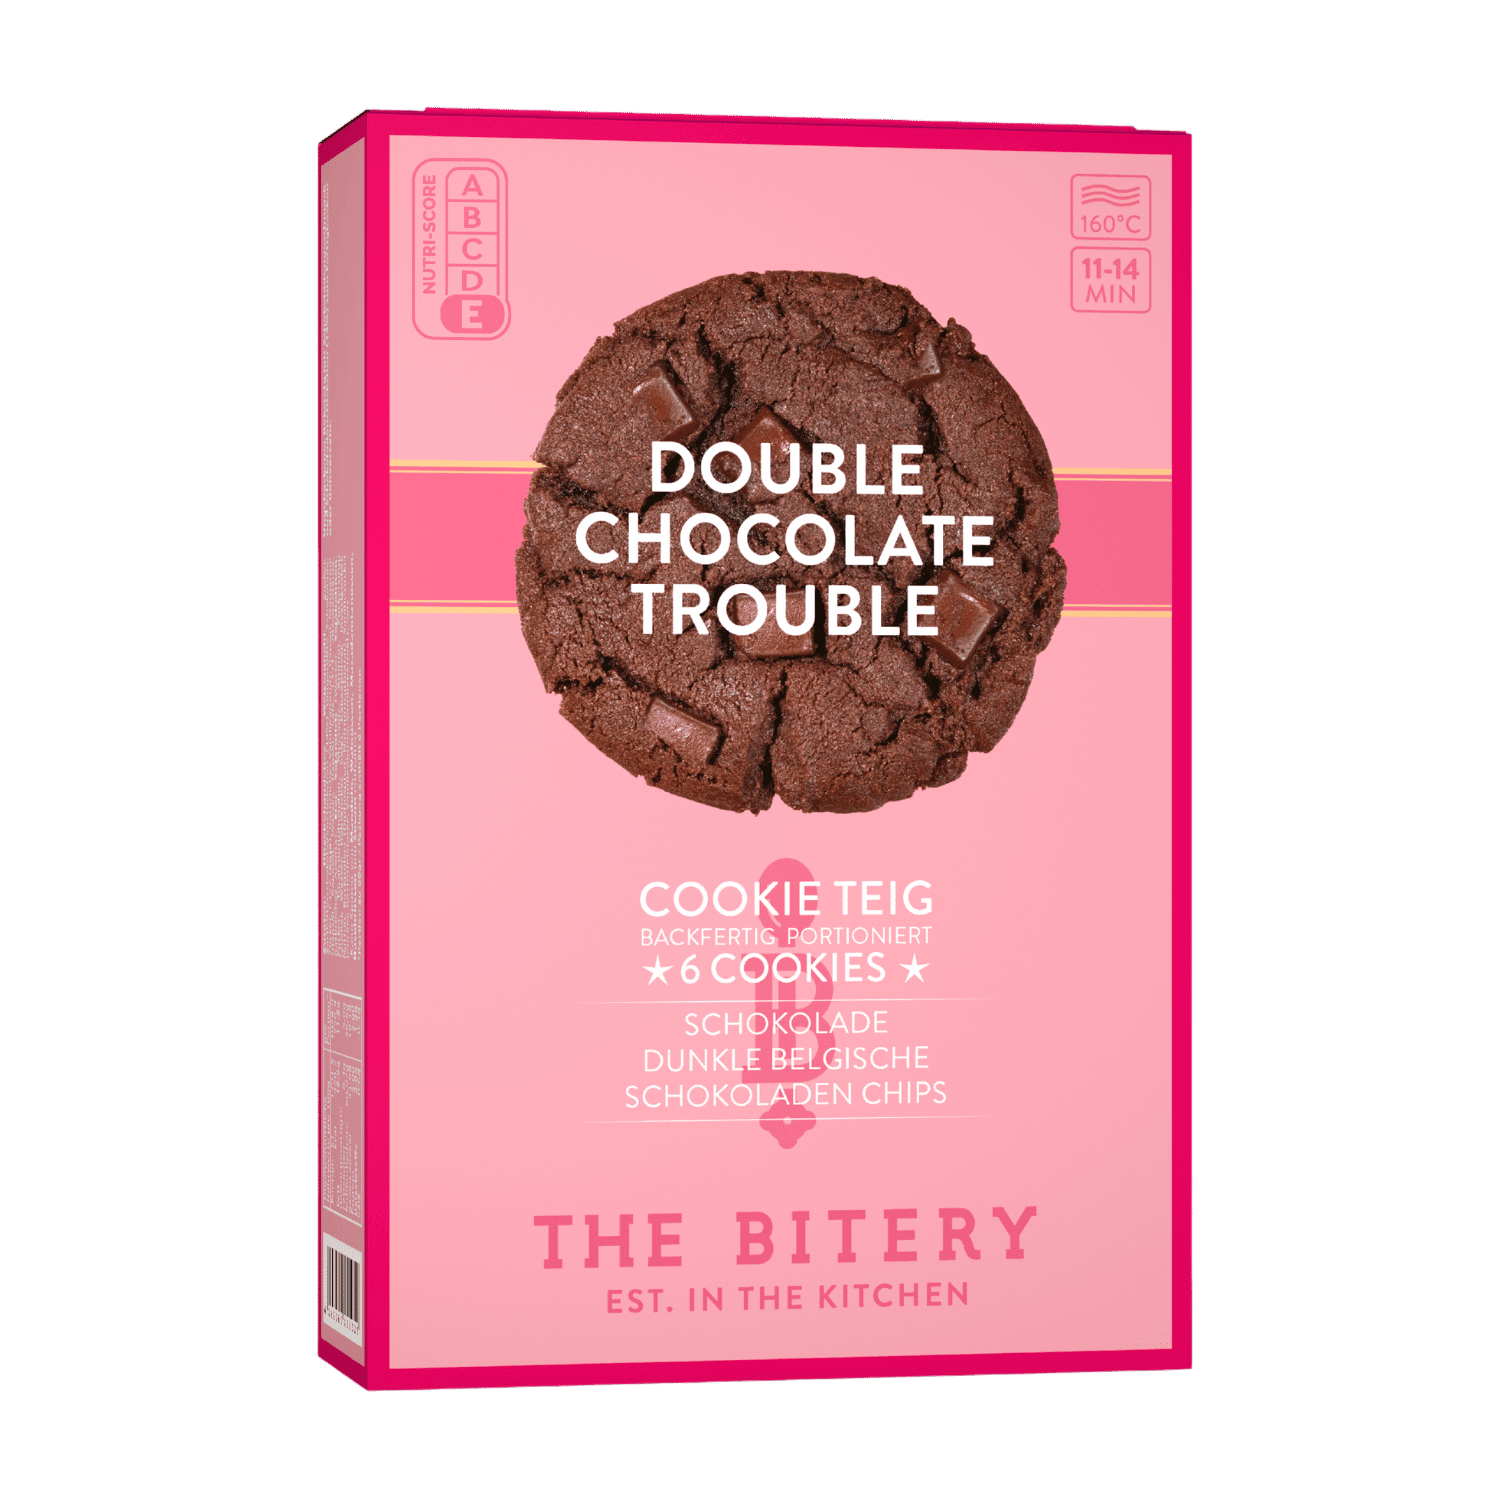 Double Chocolate Trouble